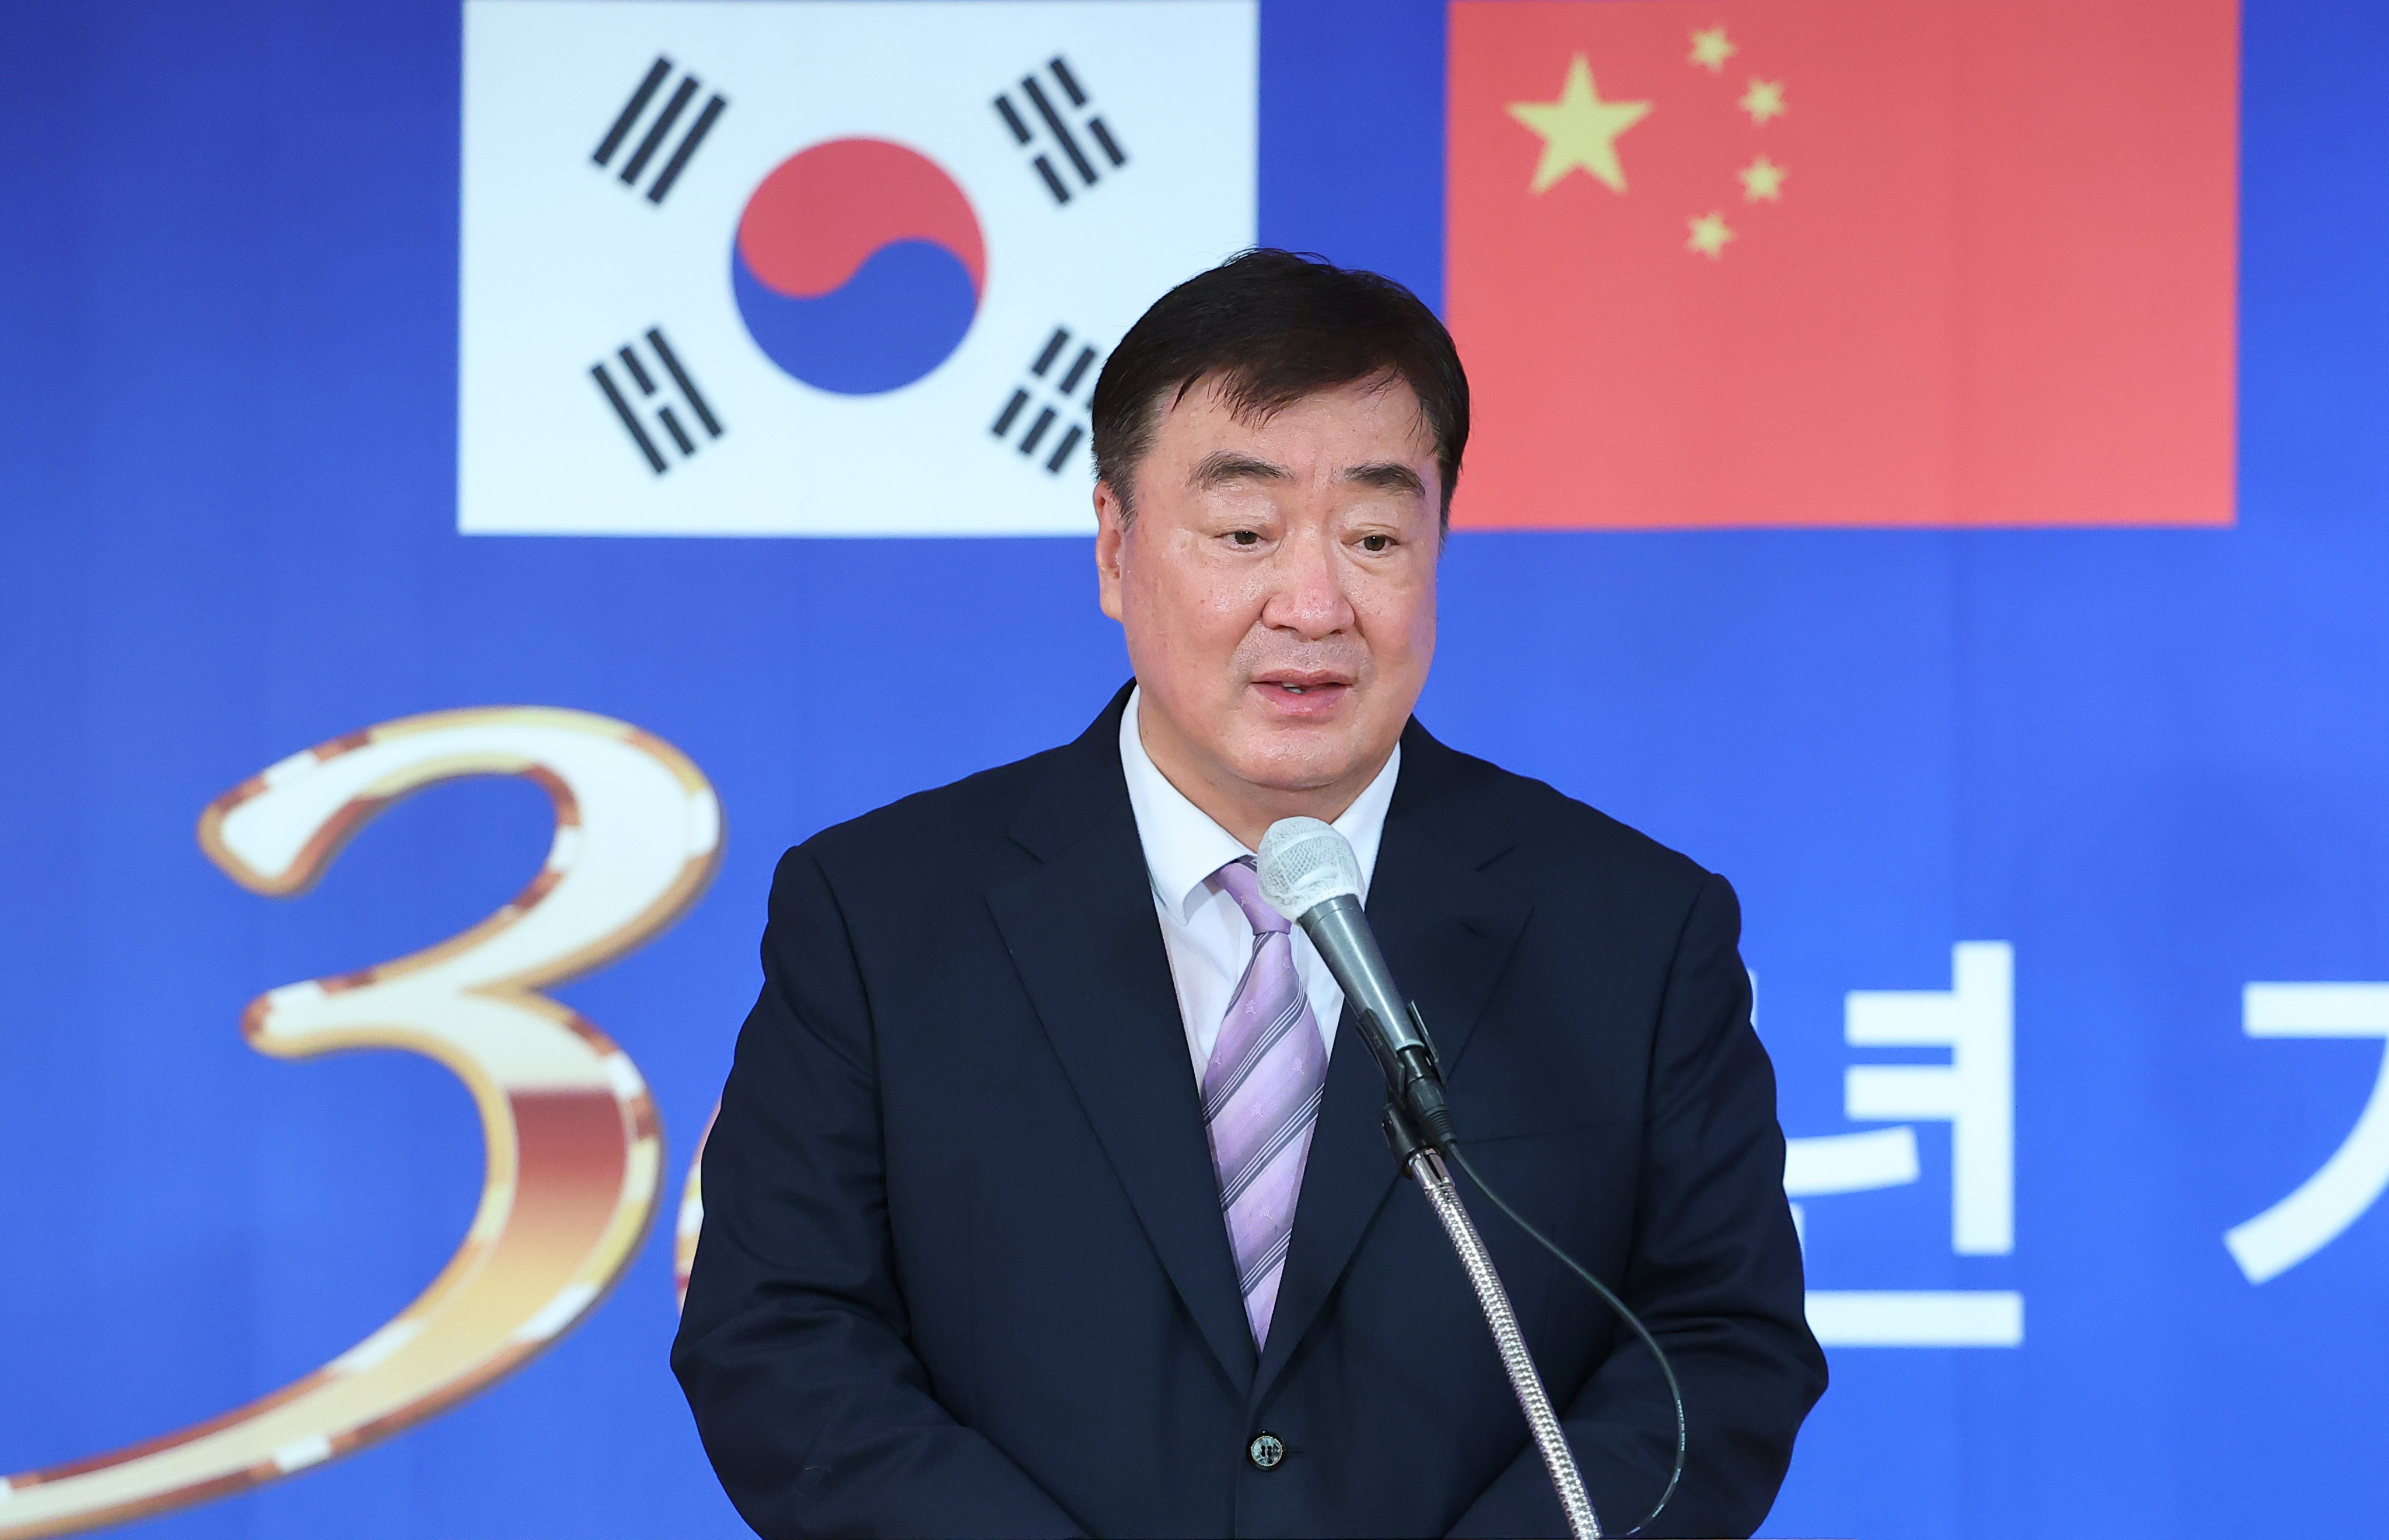 Chinese ambassador to South Korea Xing Haiming says mutual respect is needed on “core issues”. Photo: DPA